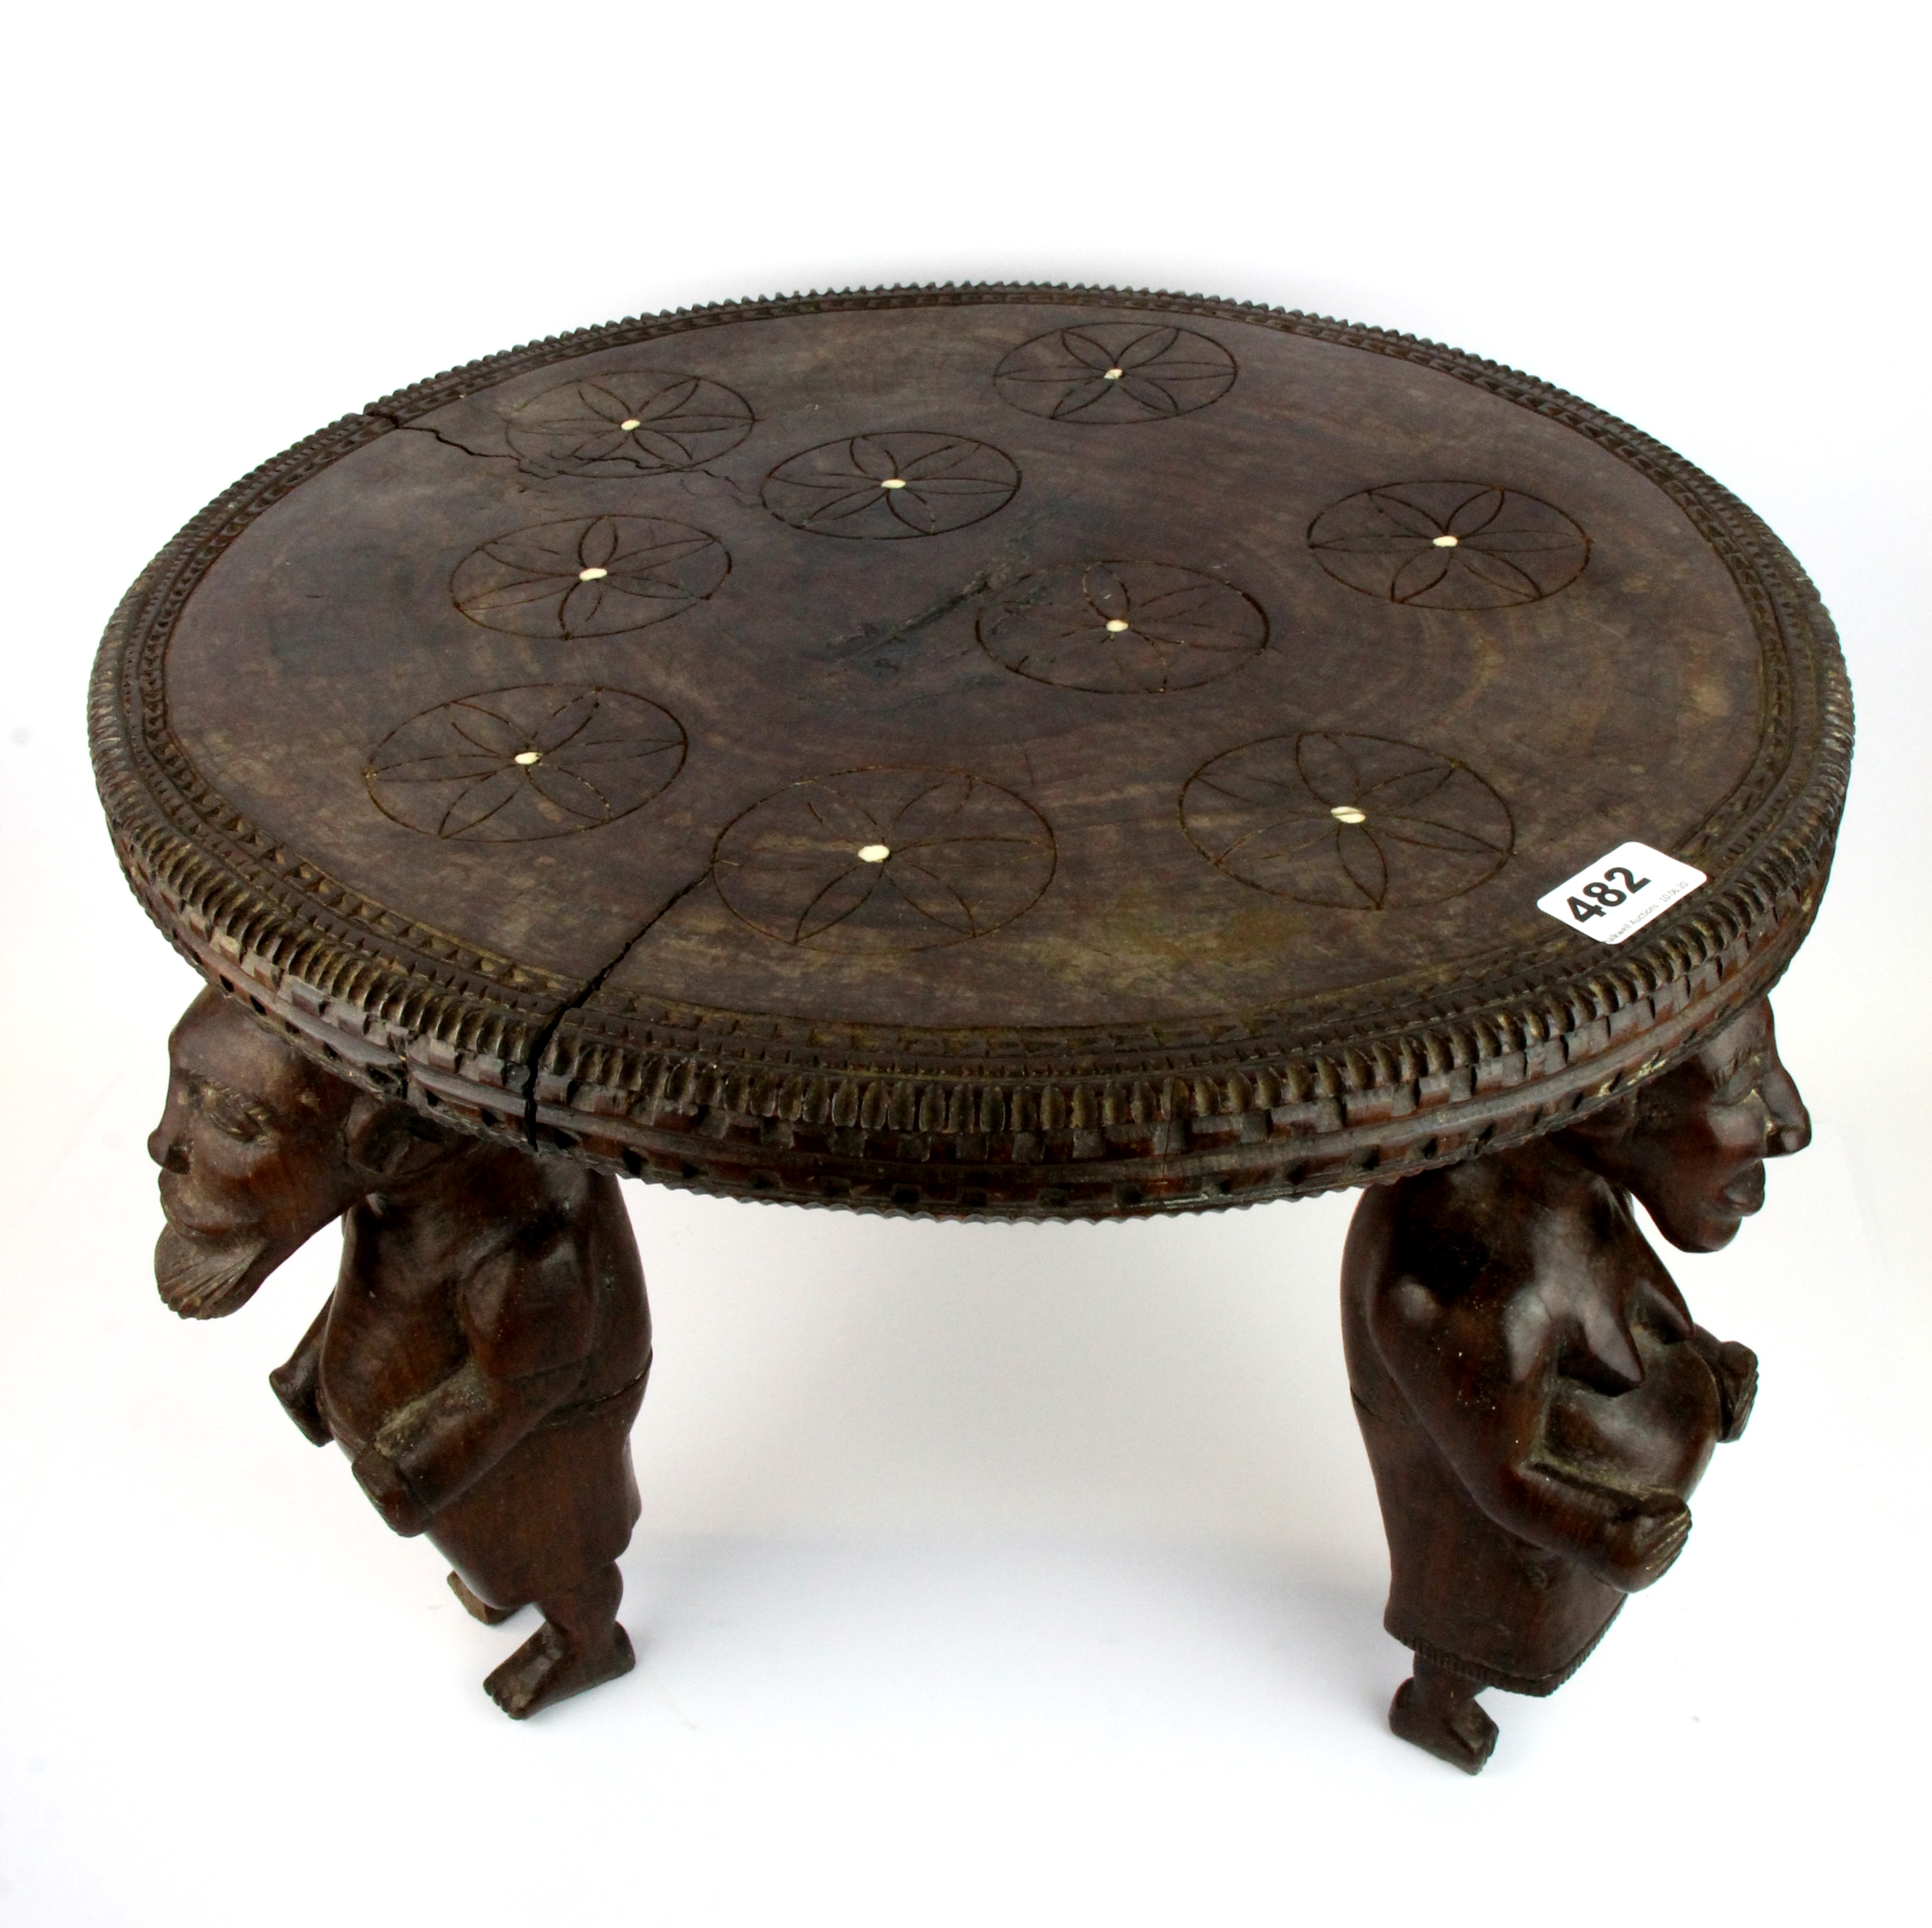 A rare African carved tribal hardwood table/stool with figural legs carved from a single piece of - Image 2 of 6